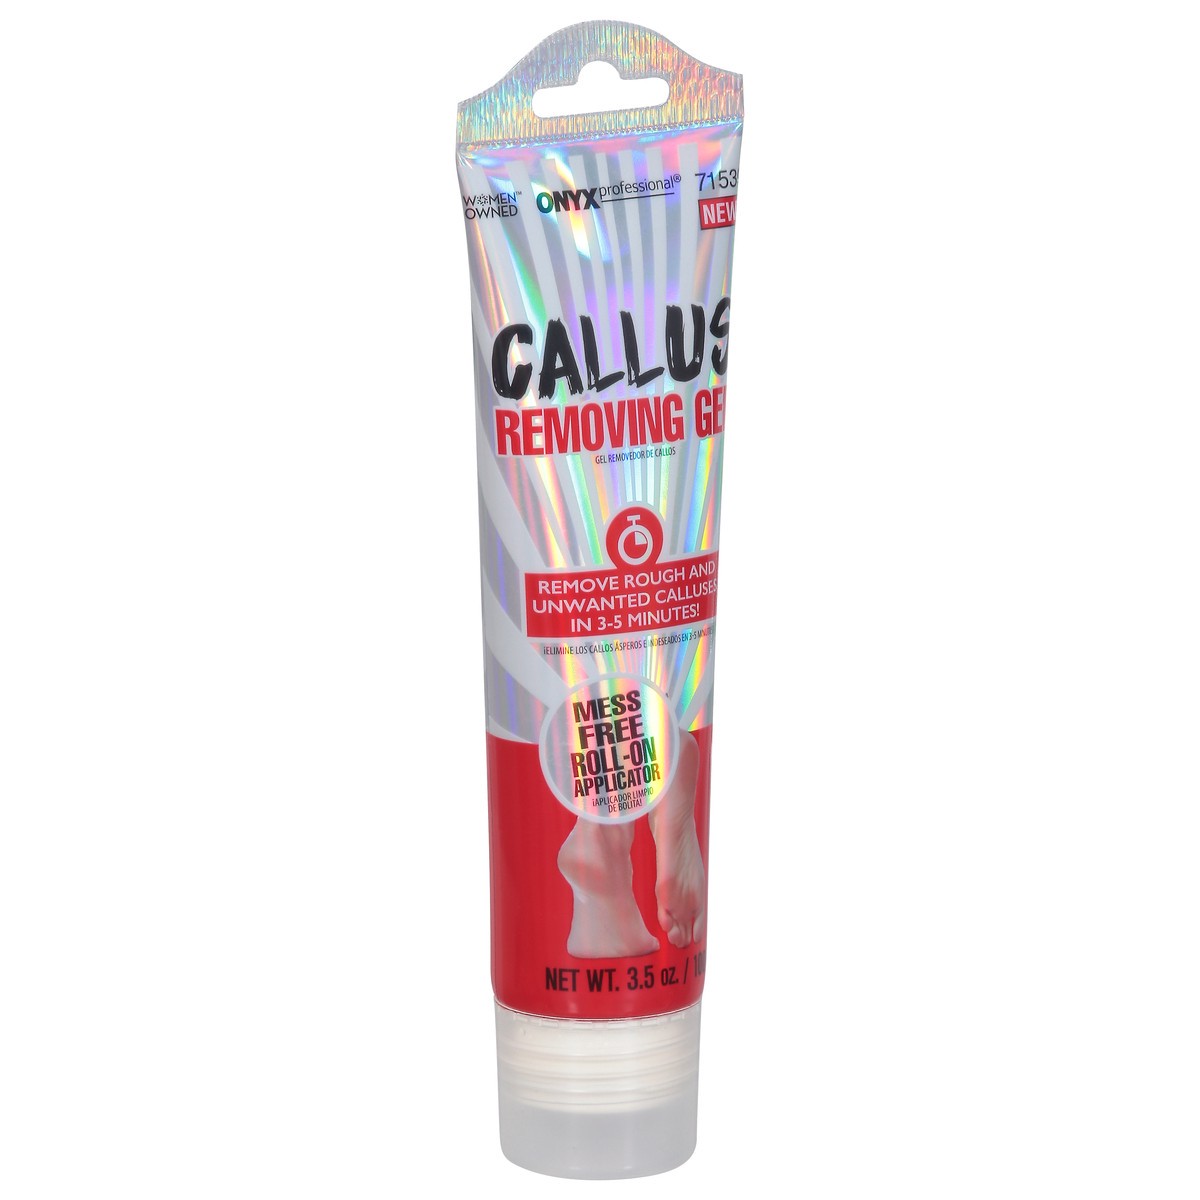 Onyx Professional Callus Removing Gel with Roll-on Applicator, 3.5 oz